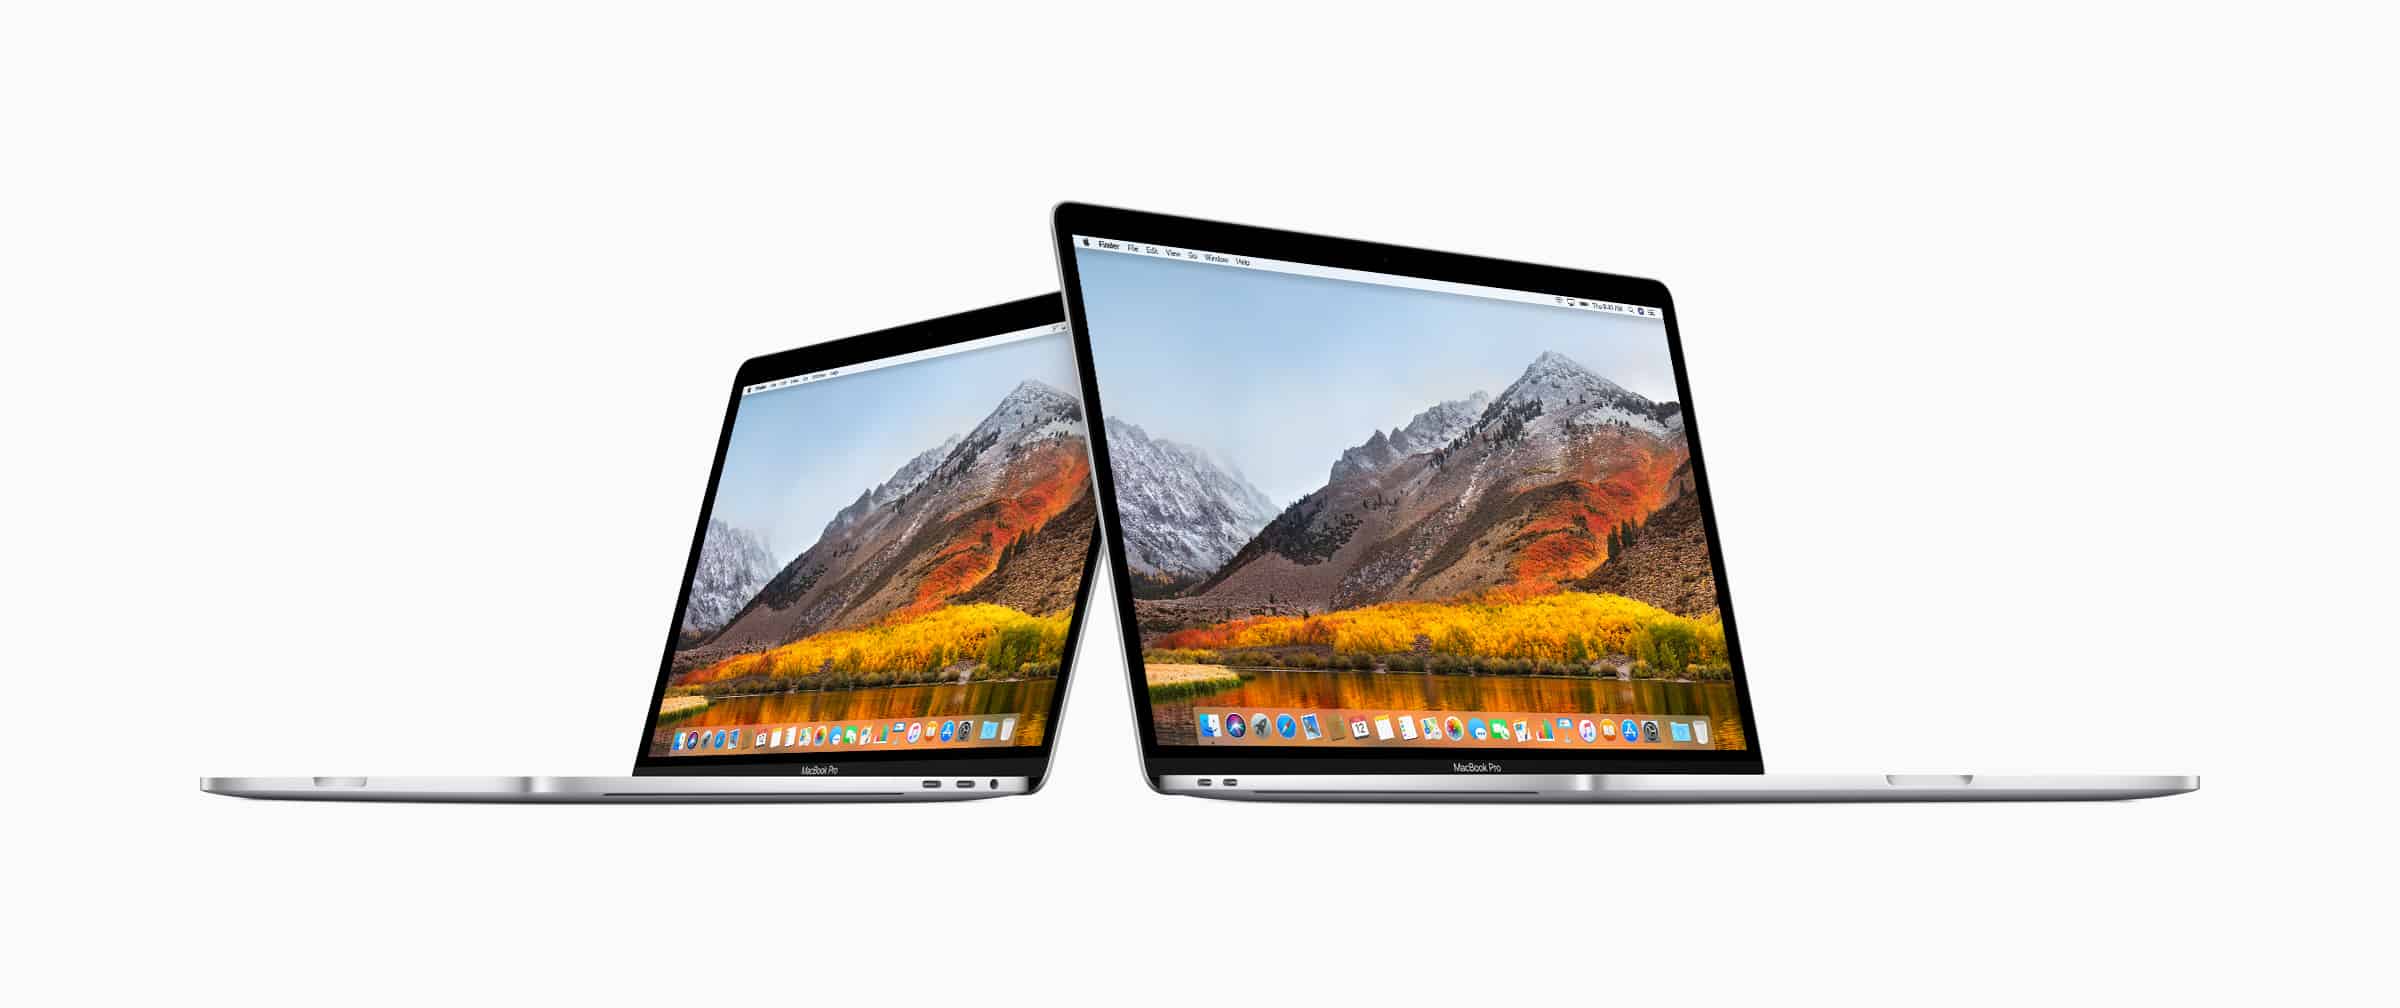 The new 13-inch and 15-inch MacBook Pro models with Touch Bar up the ante for pro users.